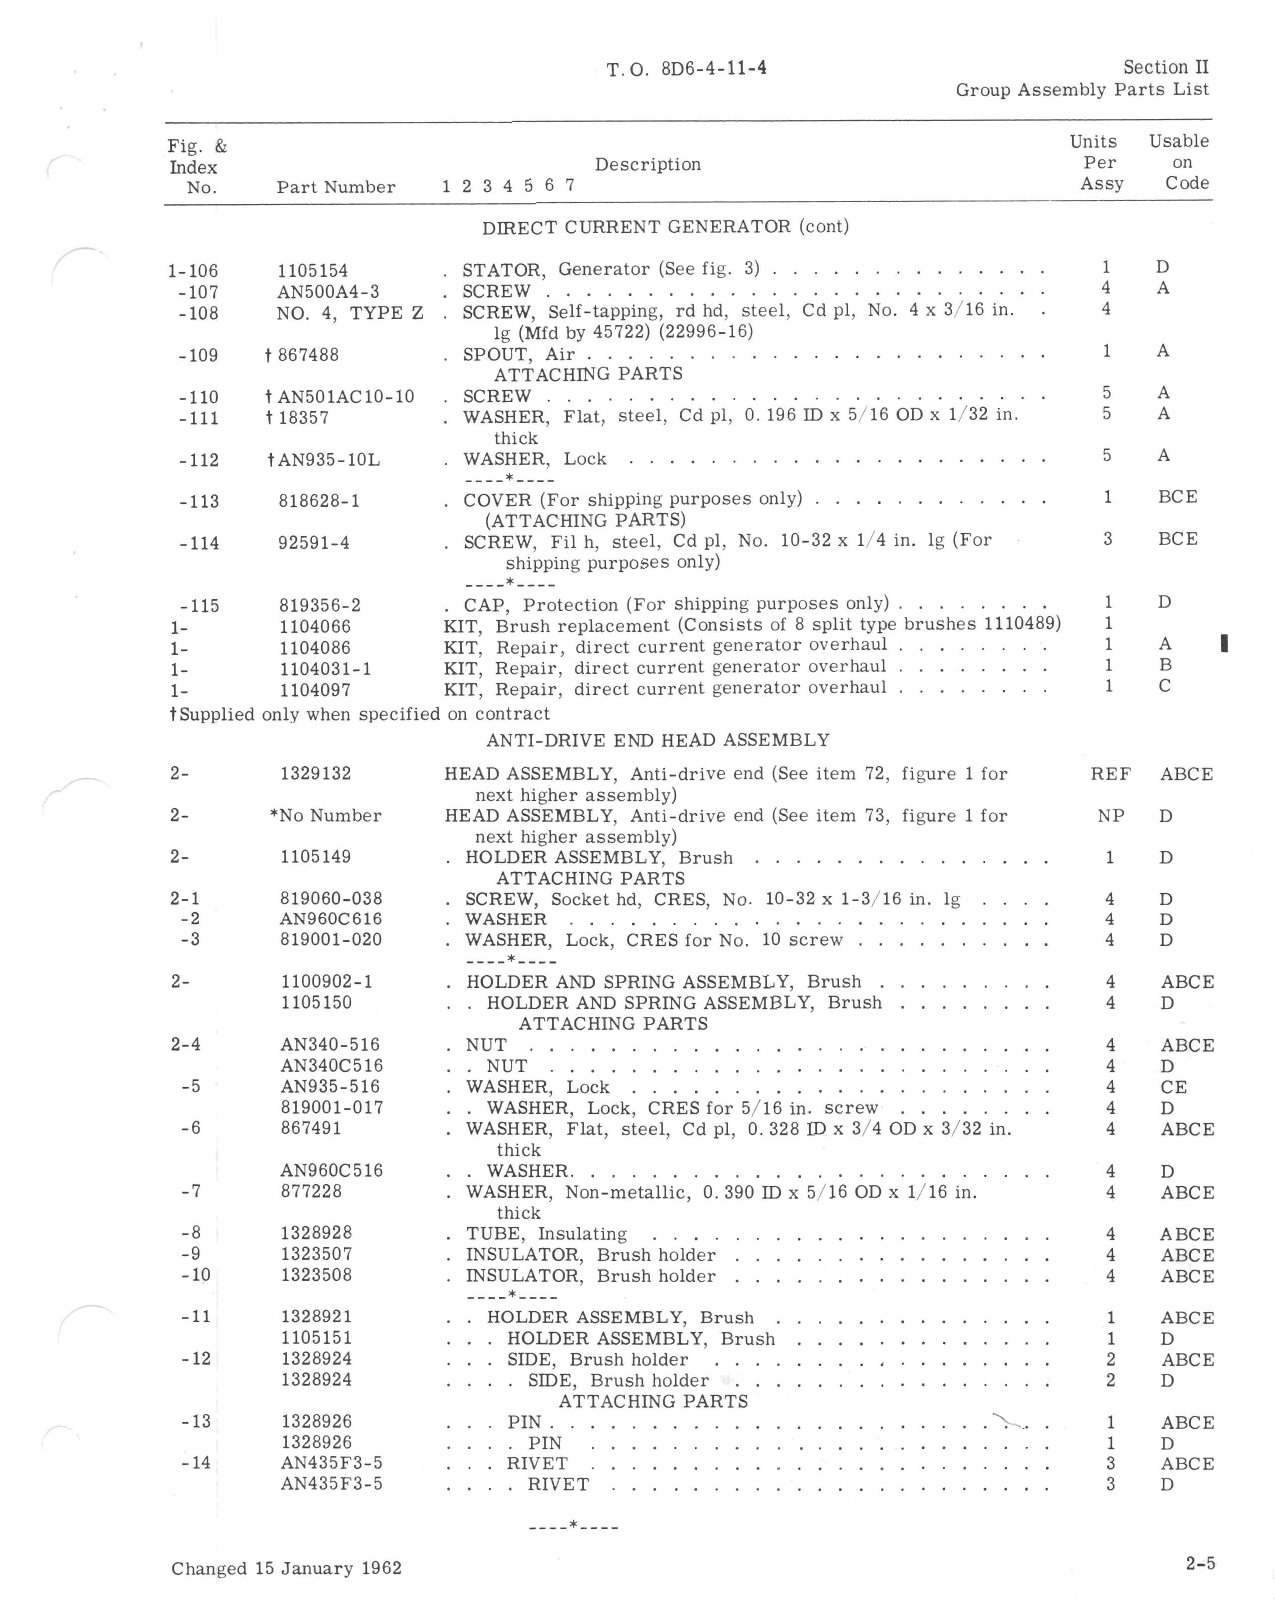 Sample page 7 from AirCorps Library document: Illustrated Parts Breakdown for Direct Current Generator - Types 30E20-1-A, 30E20-5-A, 30E20-5-B, 30E20-19-A, and 30E20-33-B